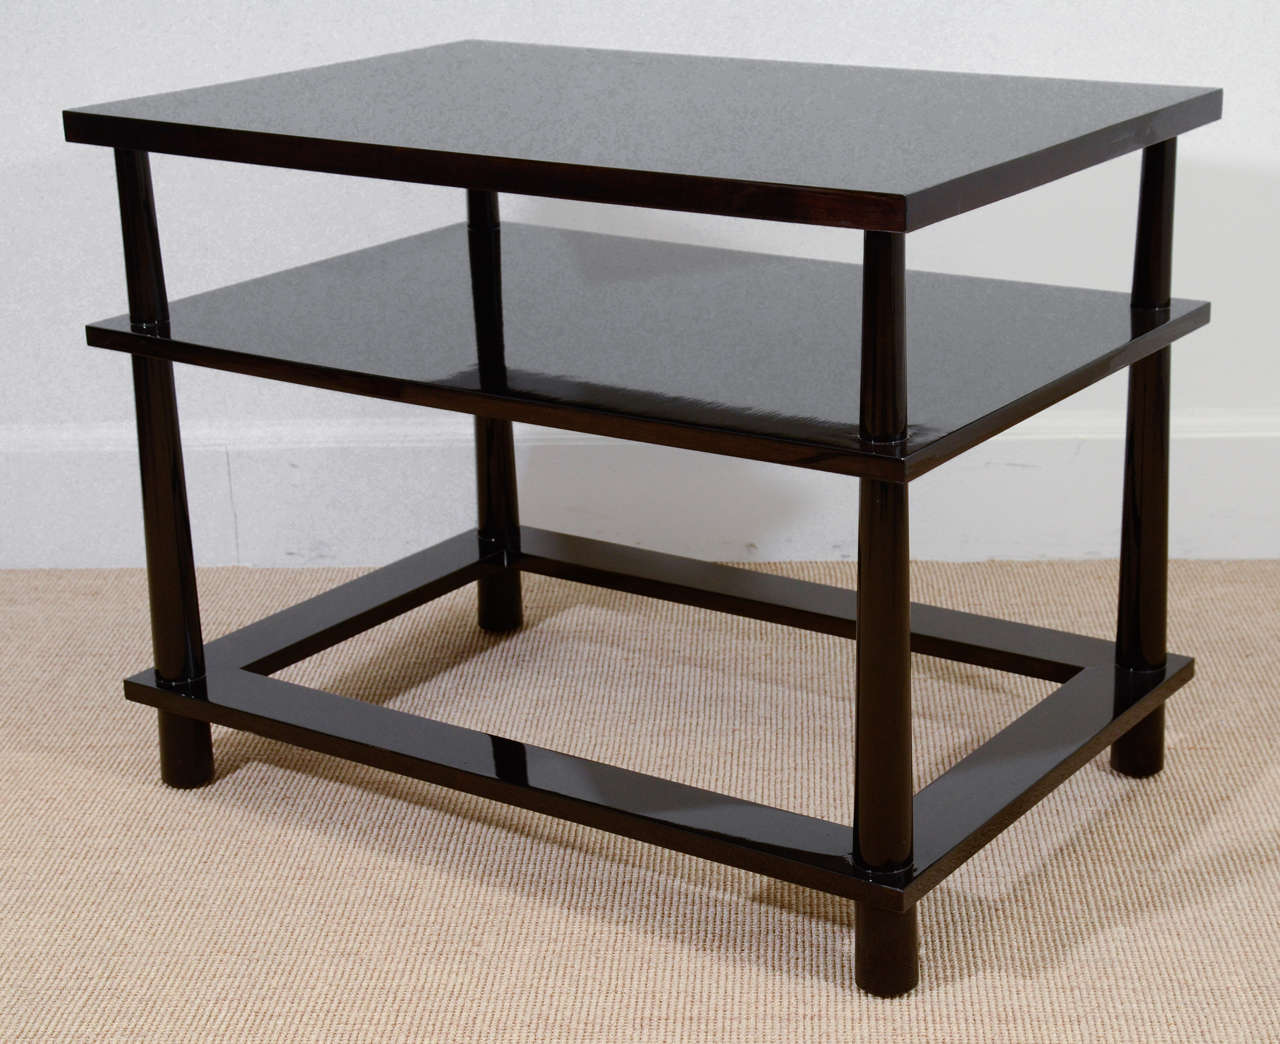 Each with a high middle shelf and a lower open shelf, all supported by inverted tapering cylindrical legs.